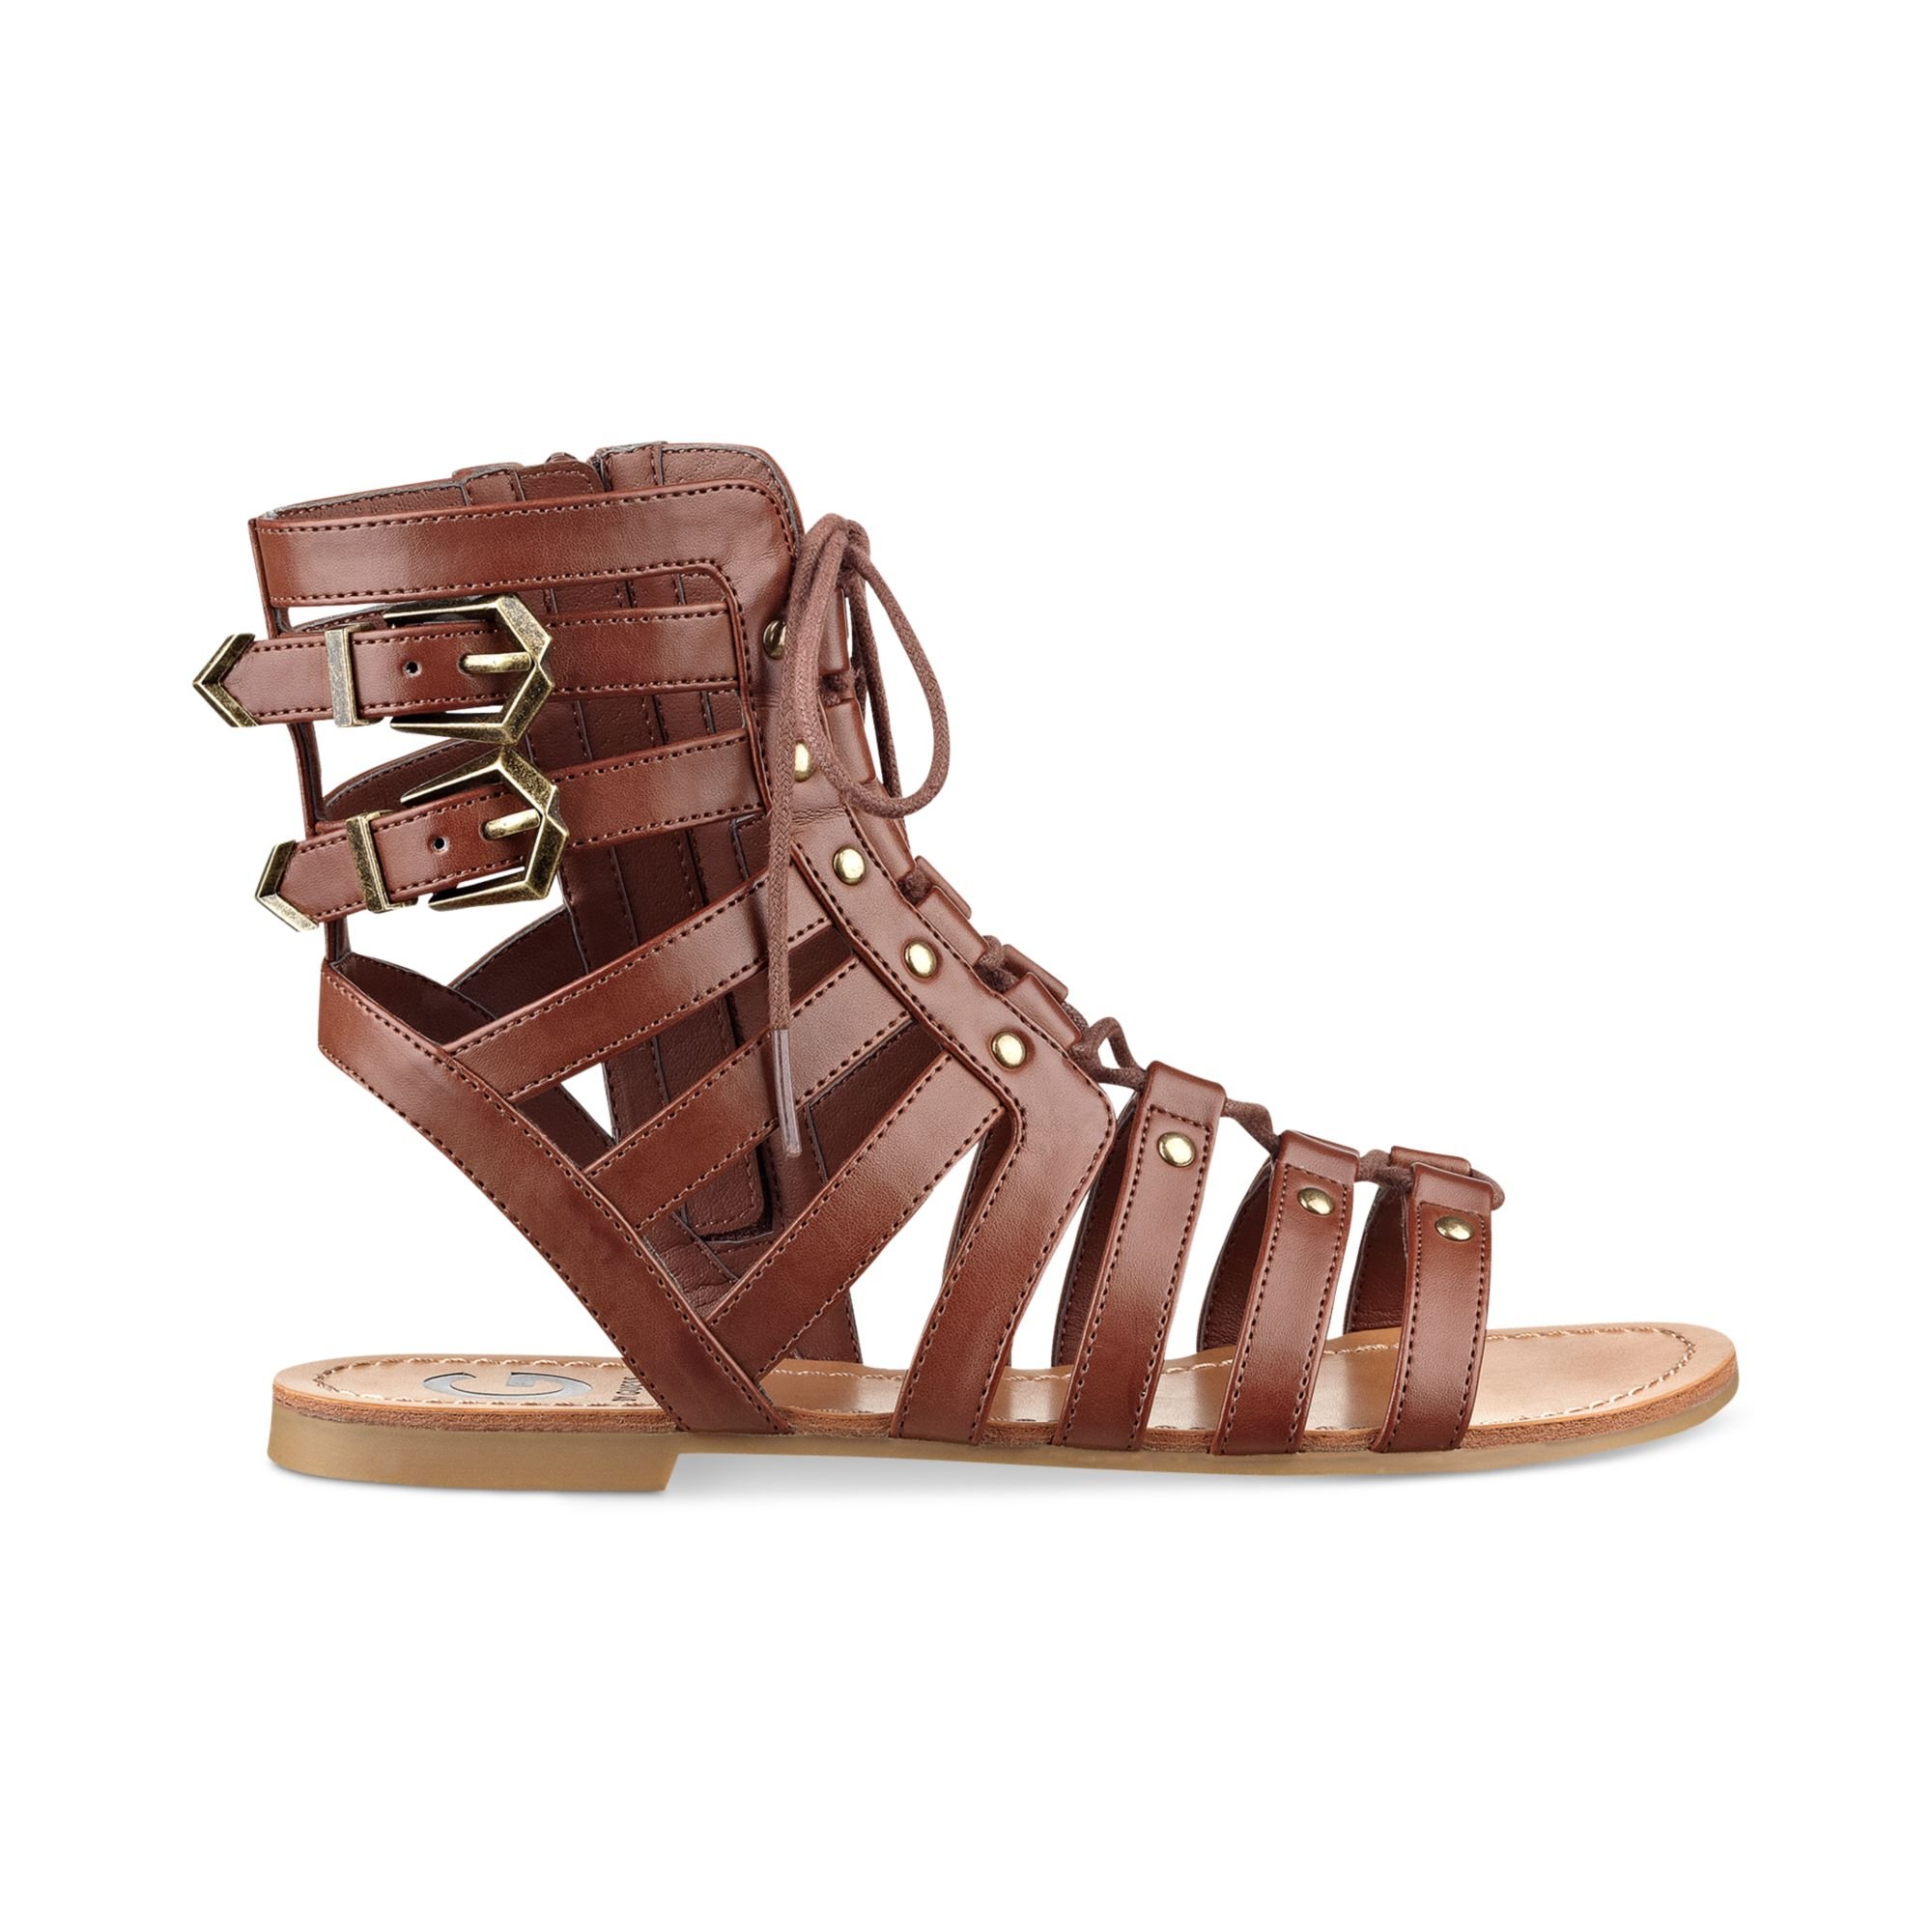 Lyst - G By Guess Womens Holmes Gladiator Sandals in Brown